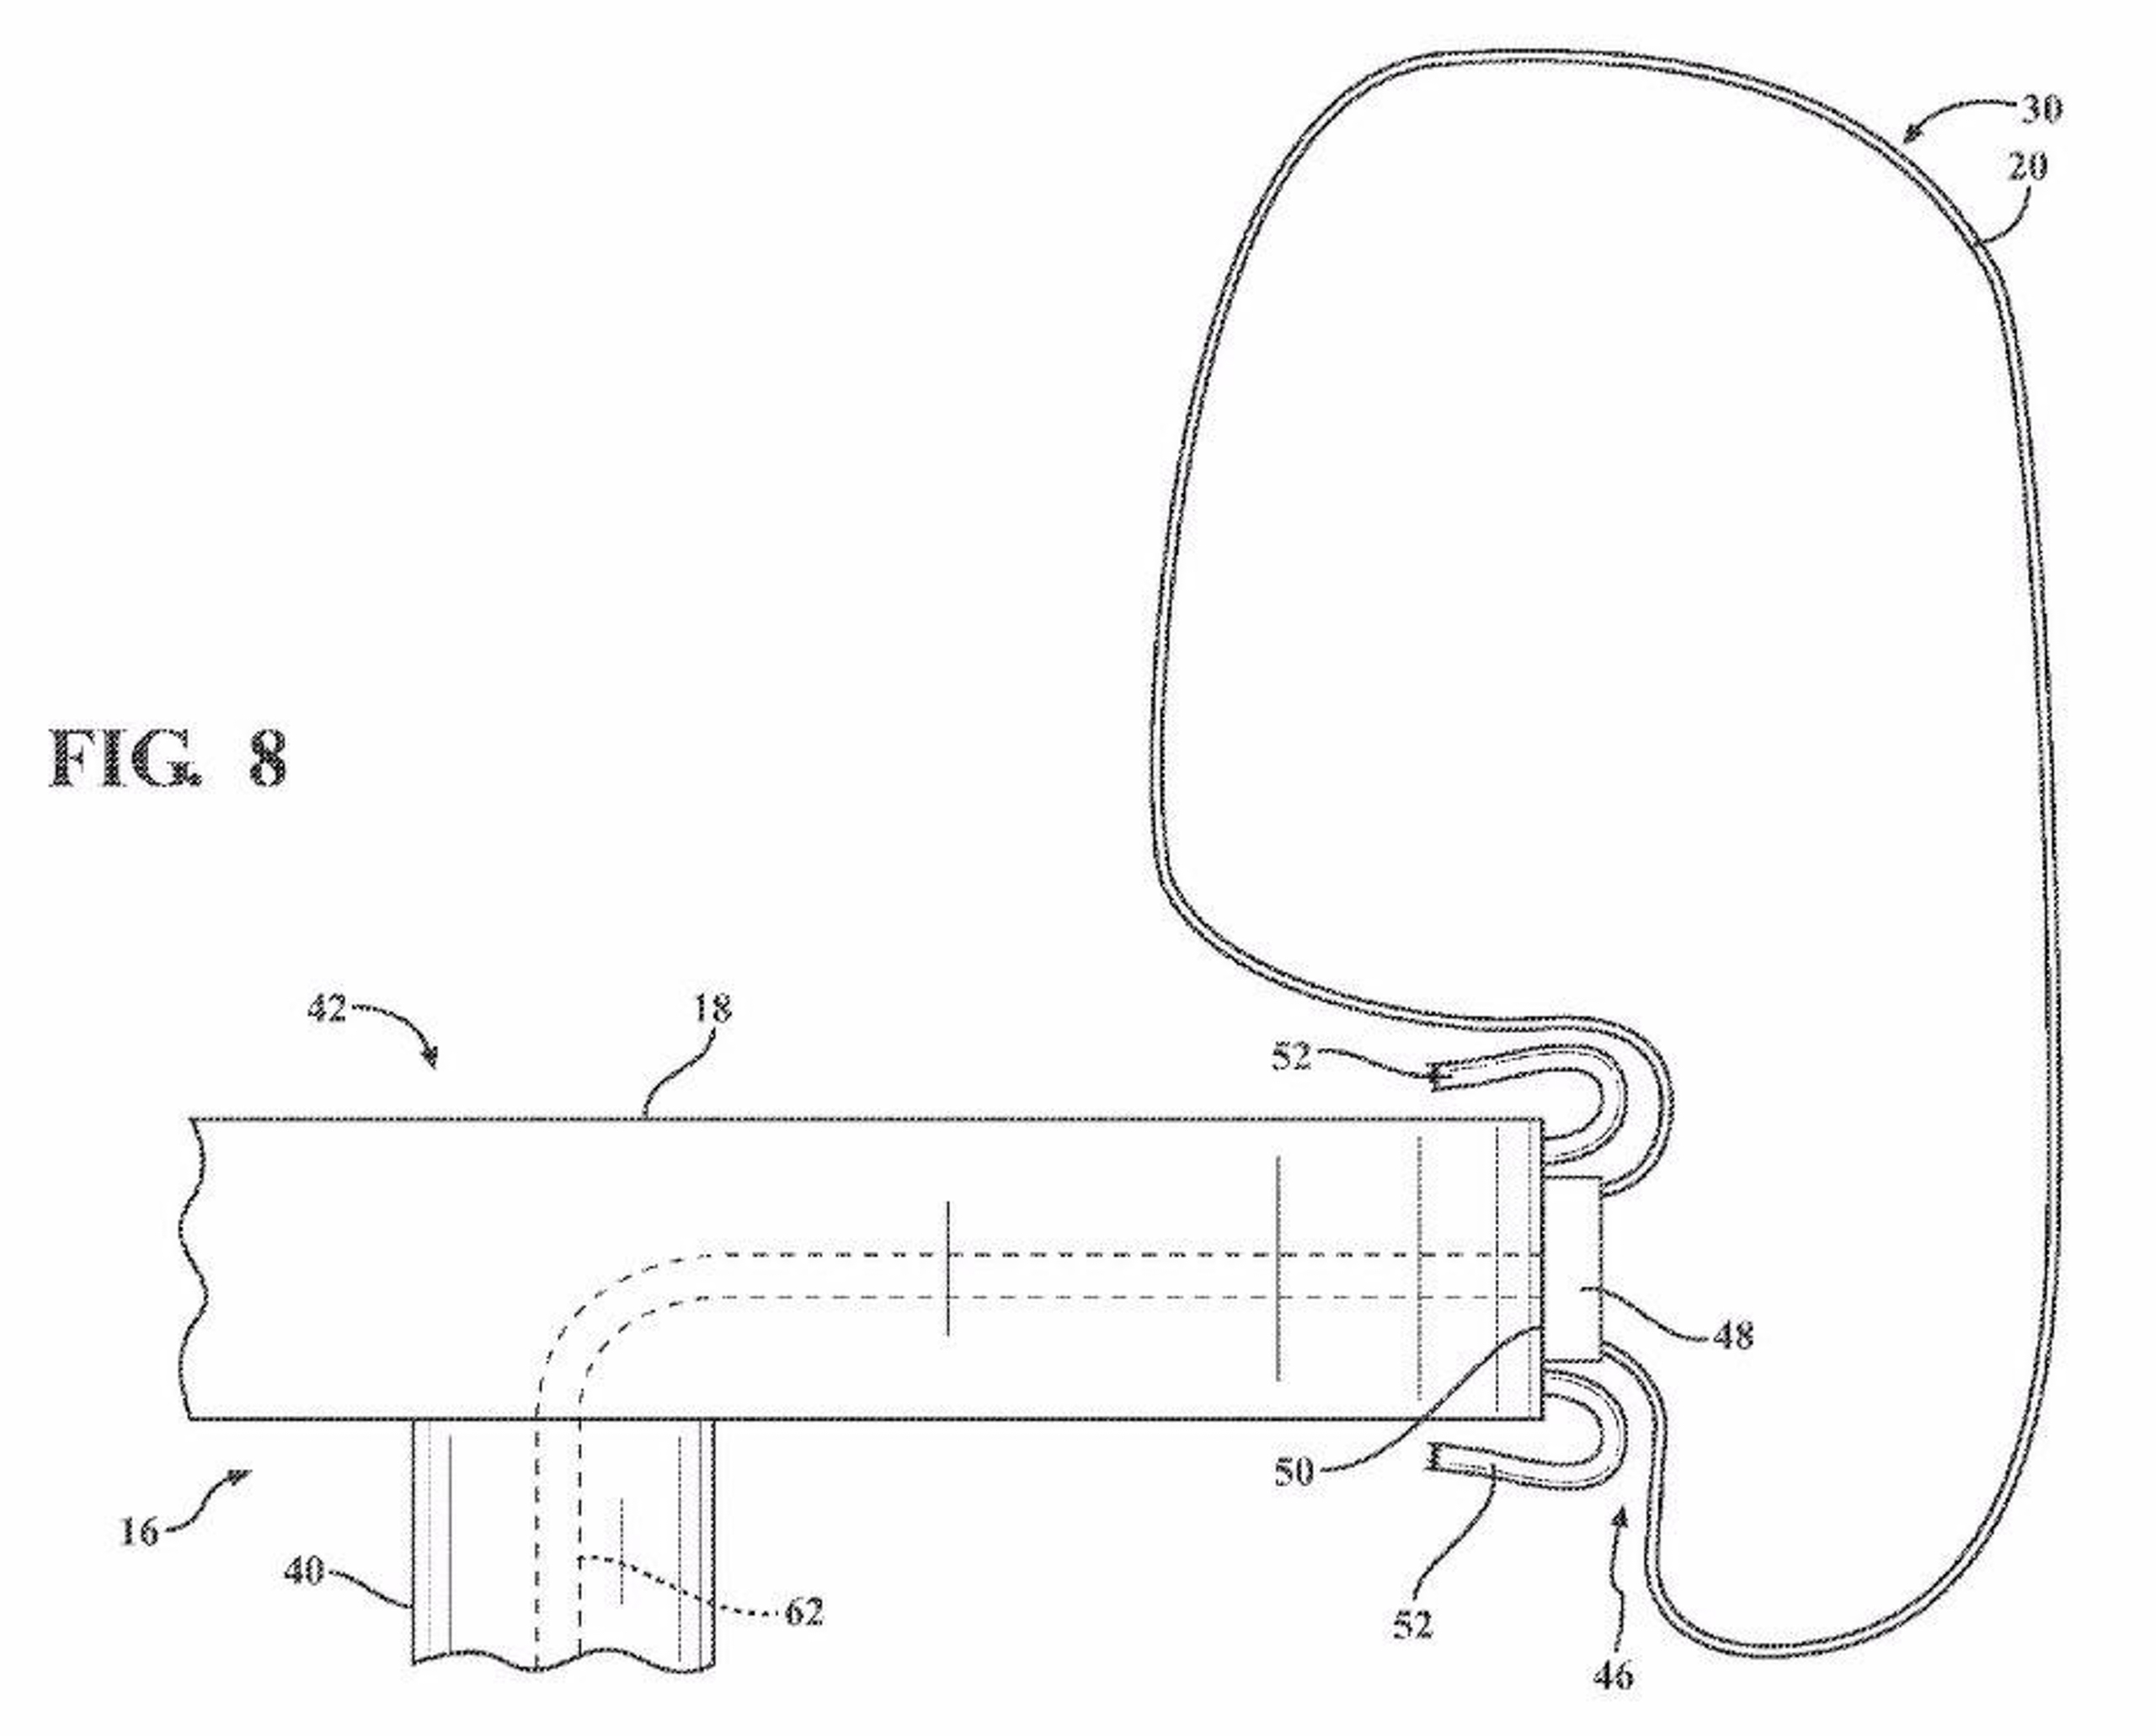 2017 Ford Retractable Table Patent - Paul Tan's Automotive News